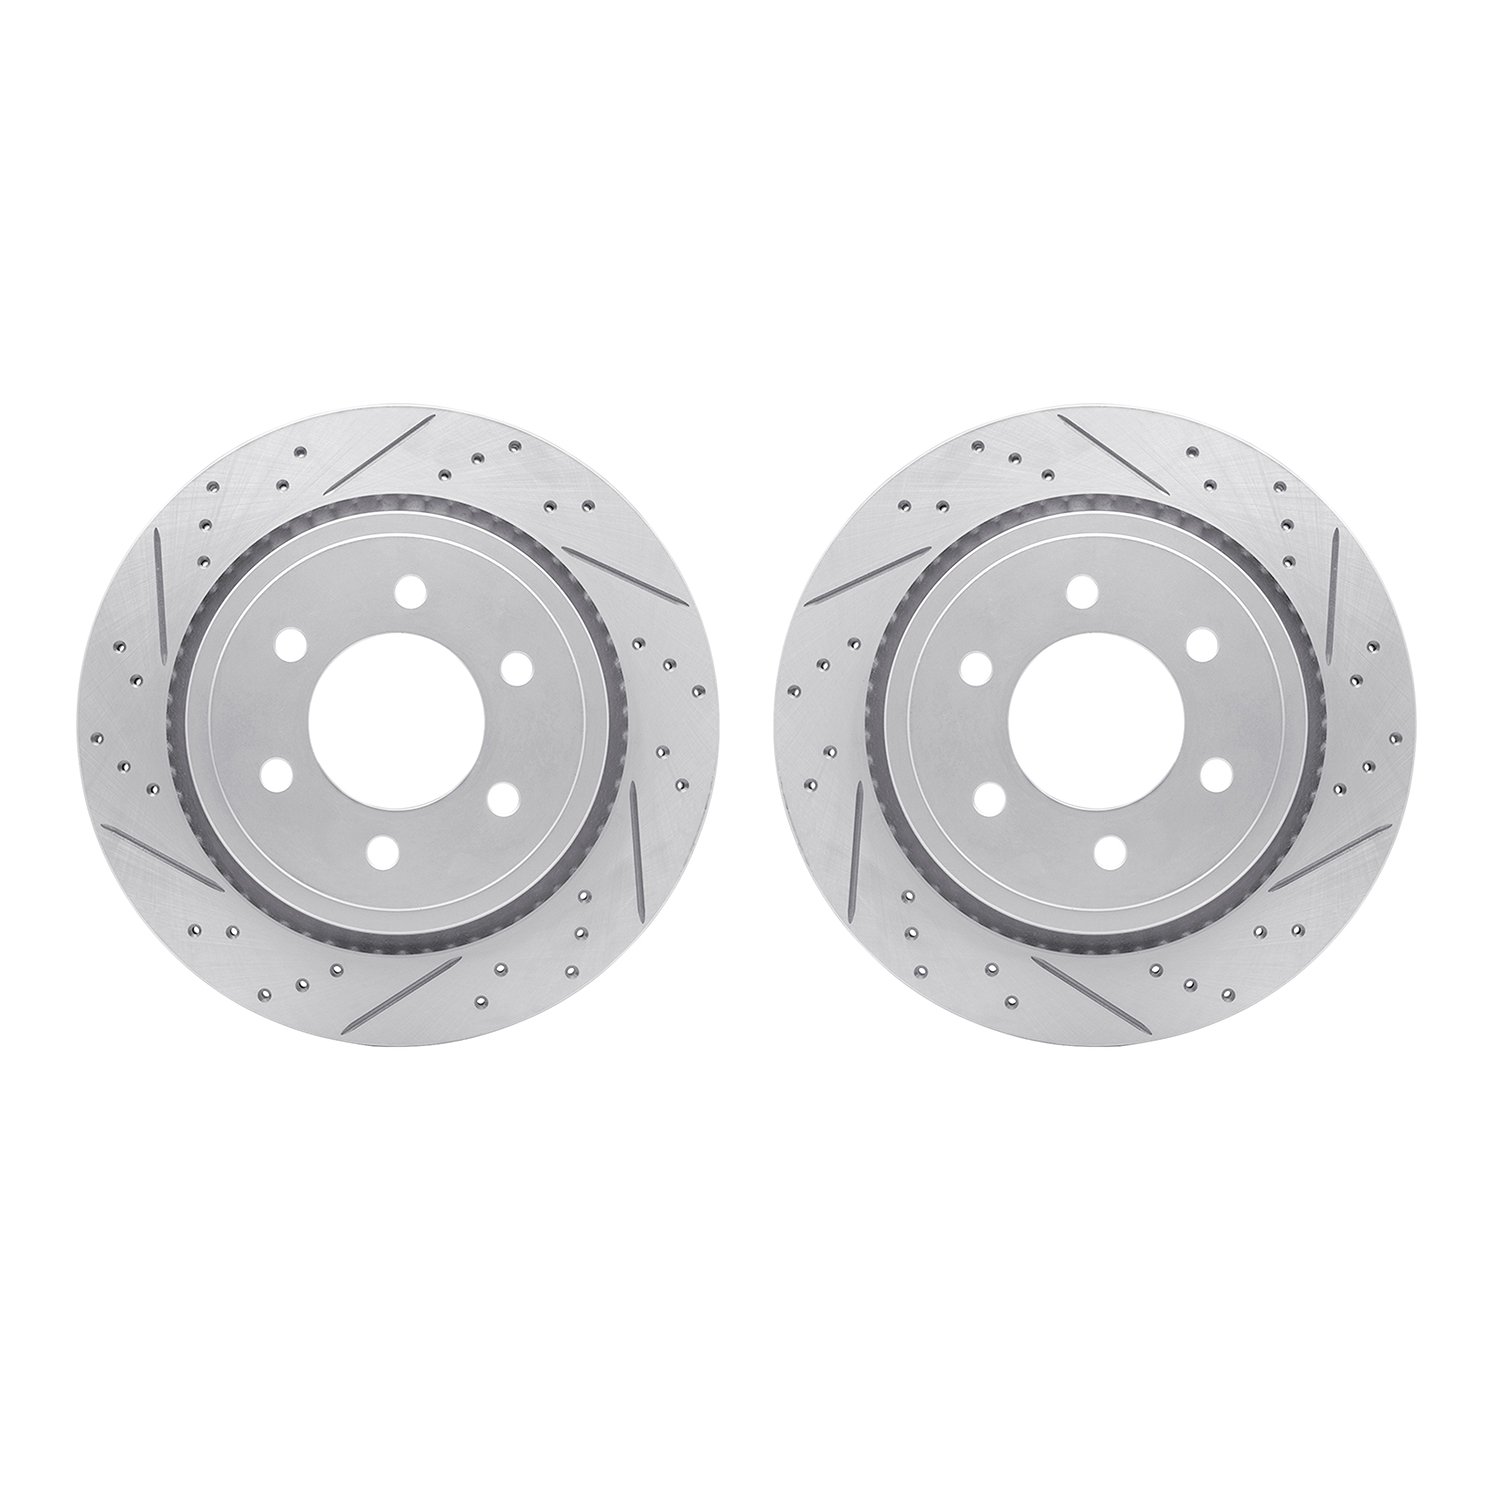 2002-54150 Geoperformance Drilled/Slotted Brake Rotors, 2015-2017 Ford/Lincoln/Mercury/Mazda, Position: Rear